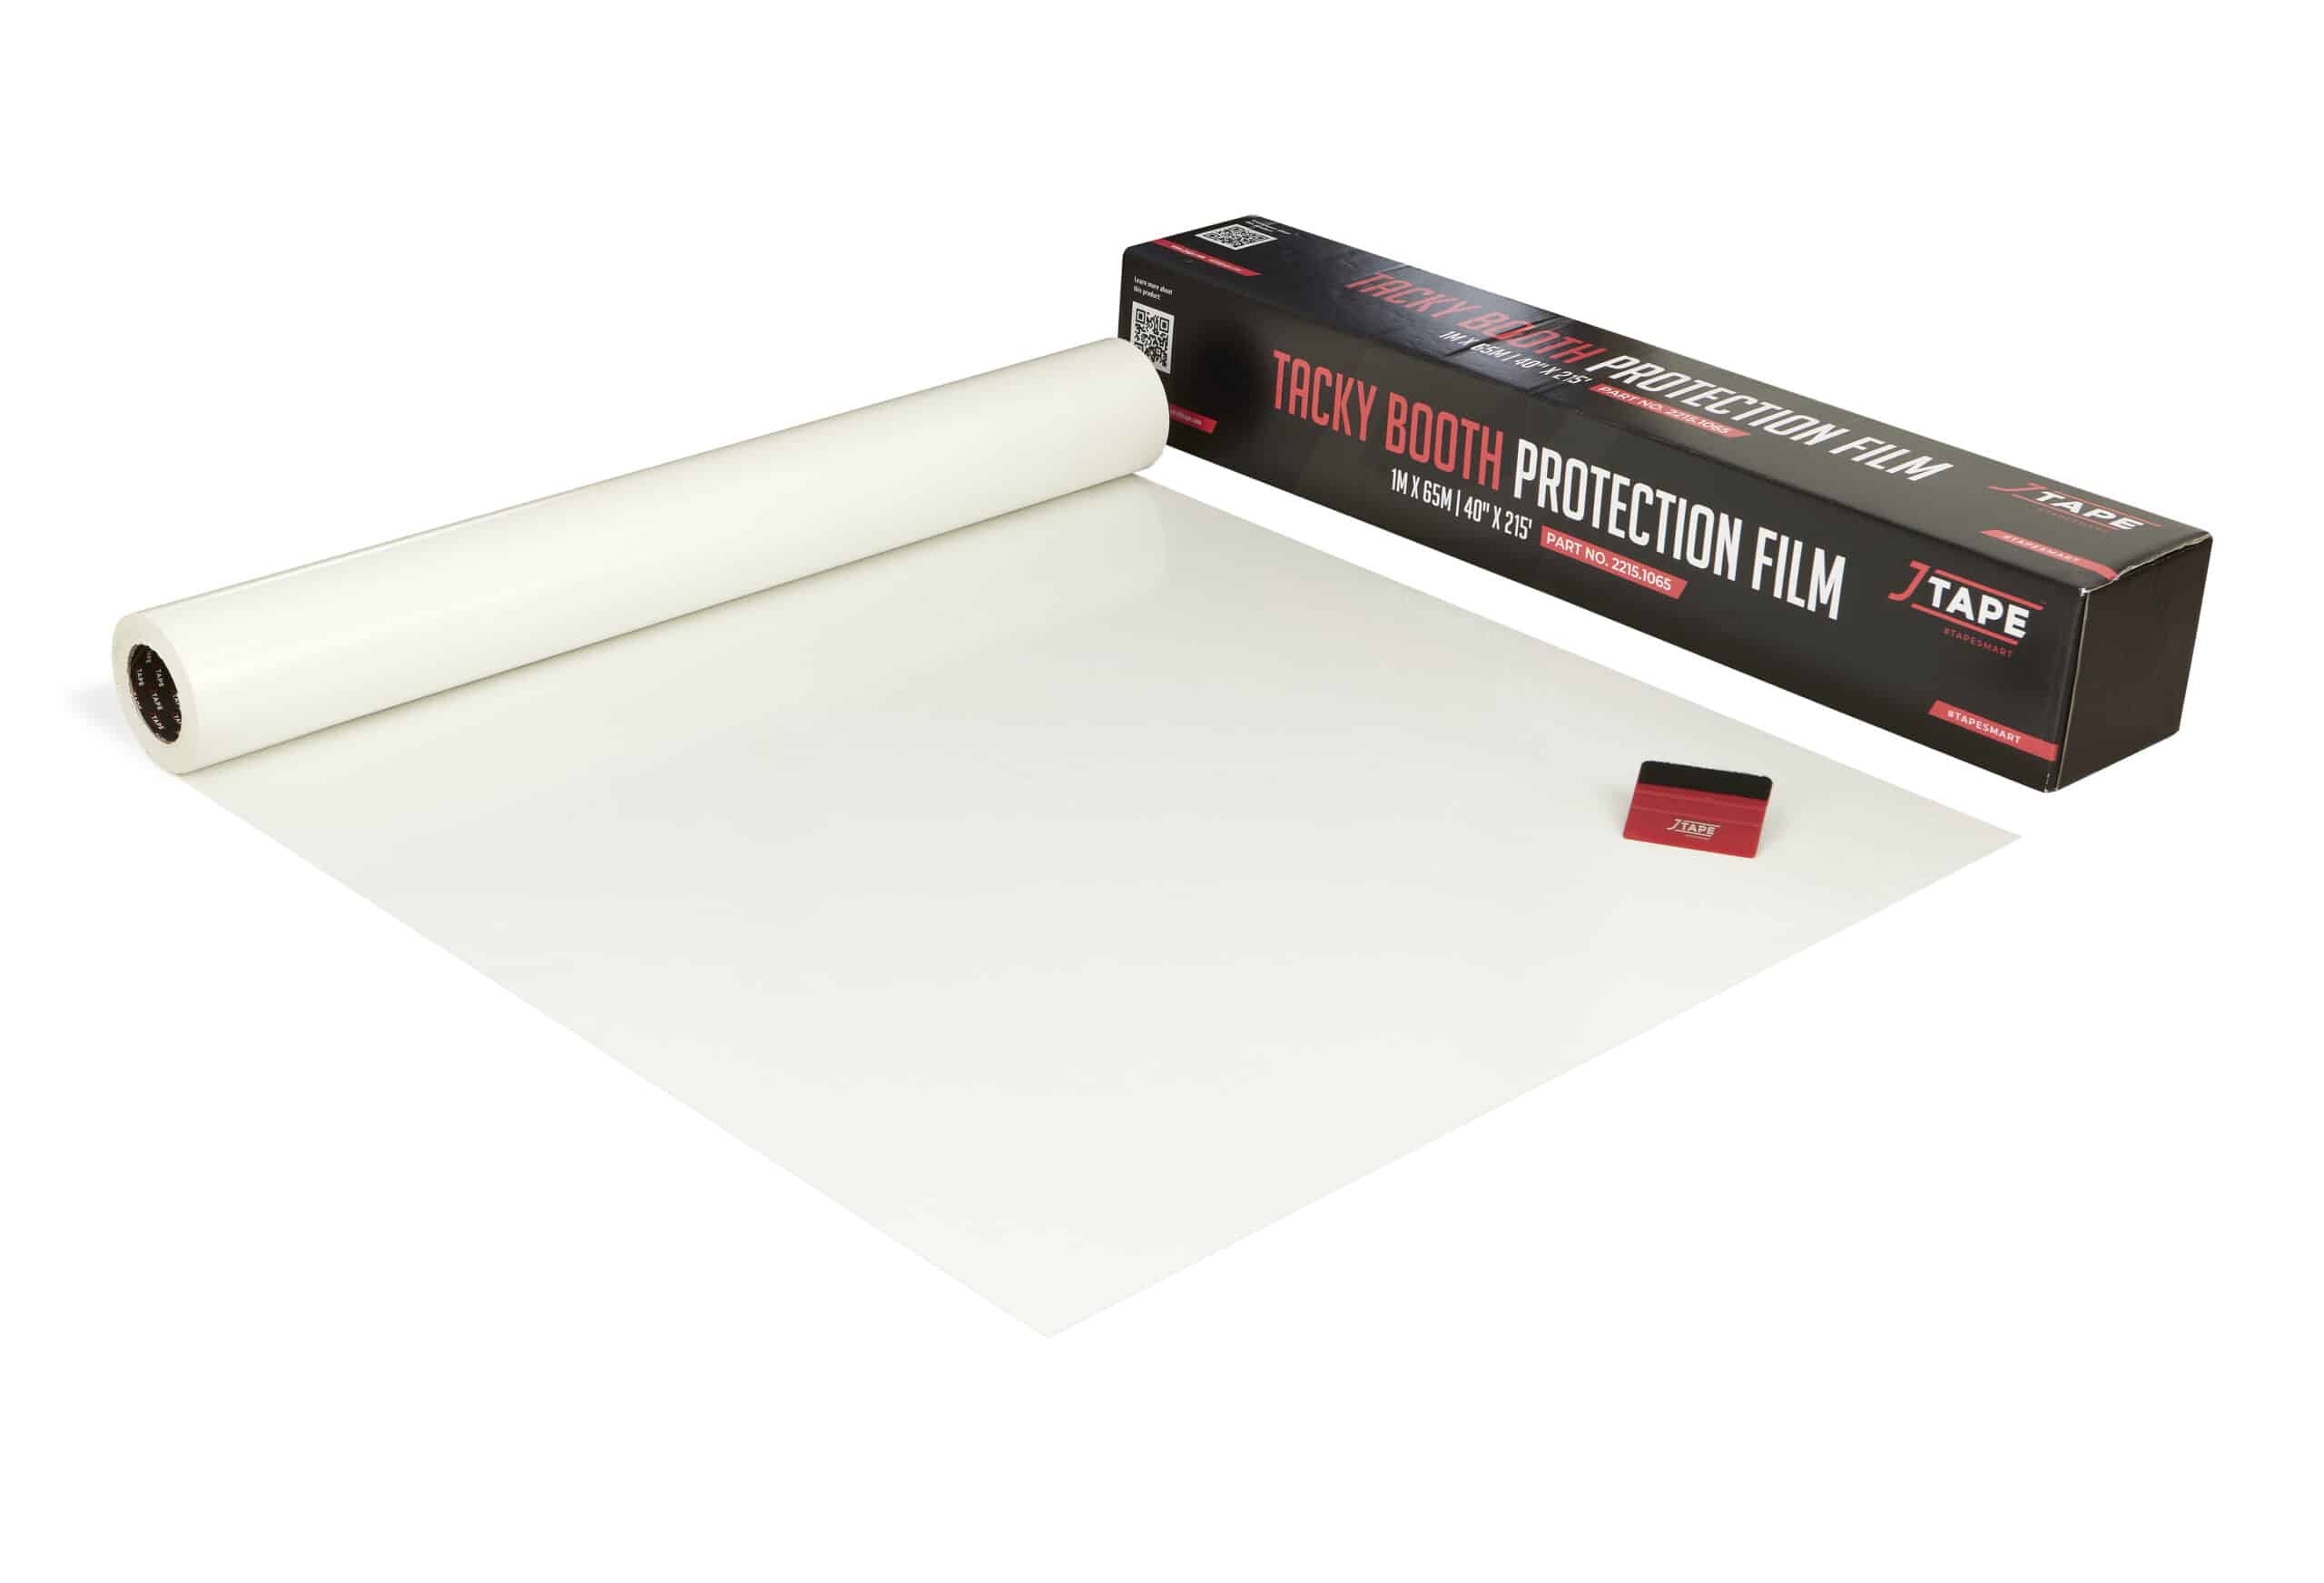 Tacky Booth Protection Film